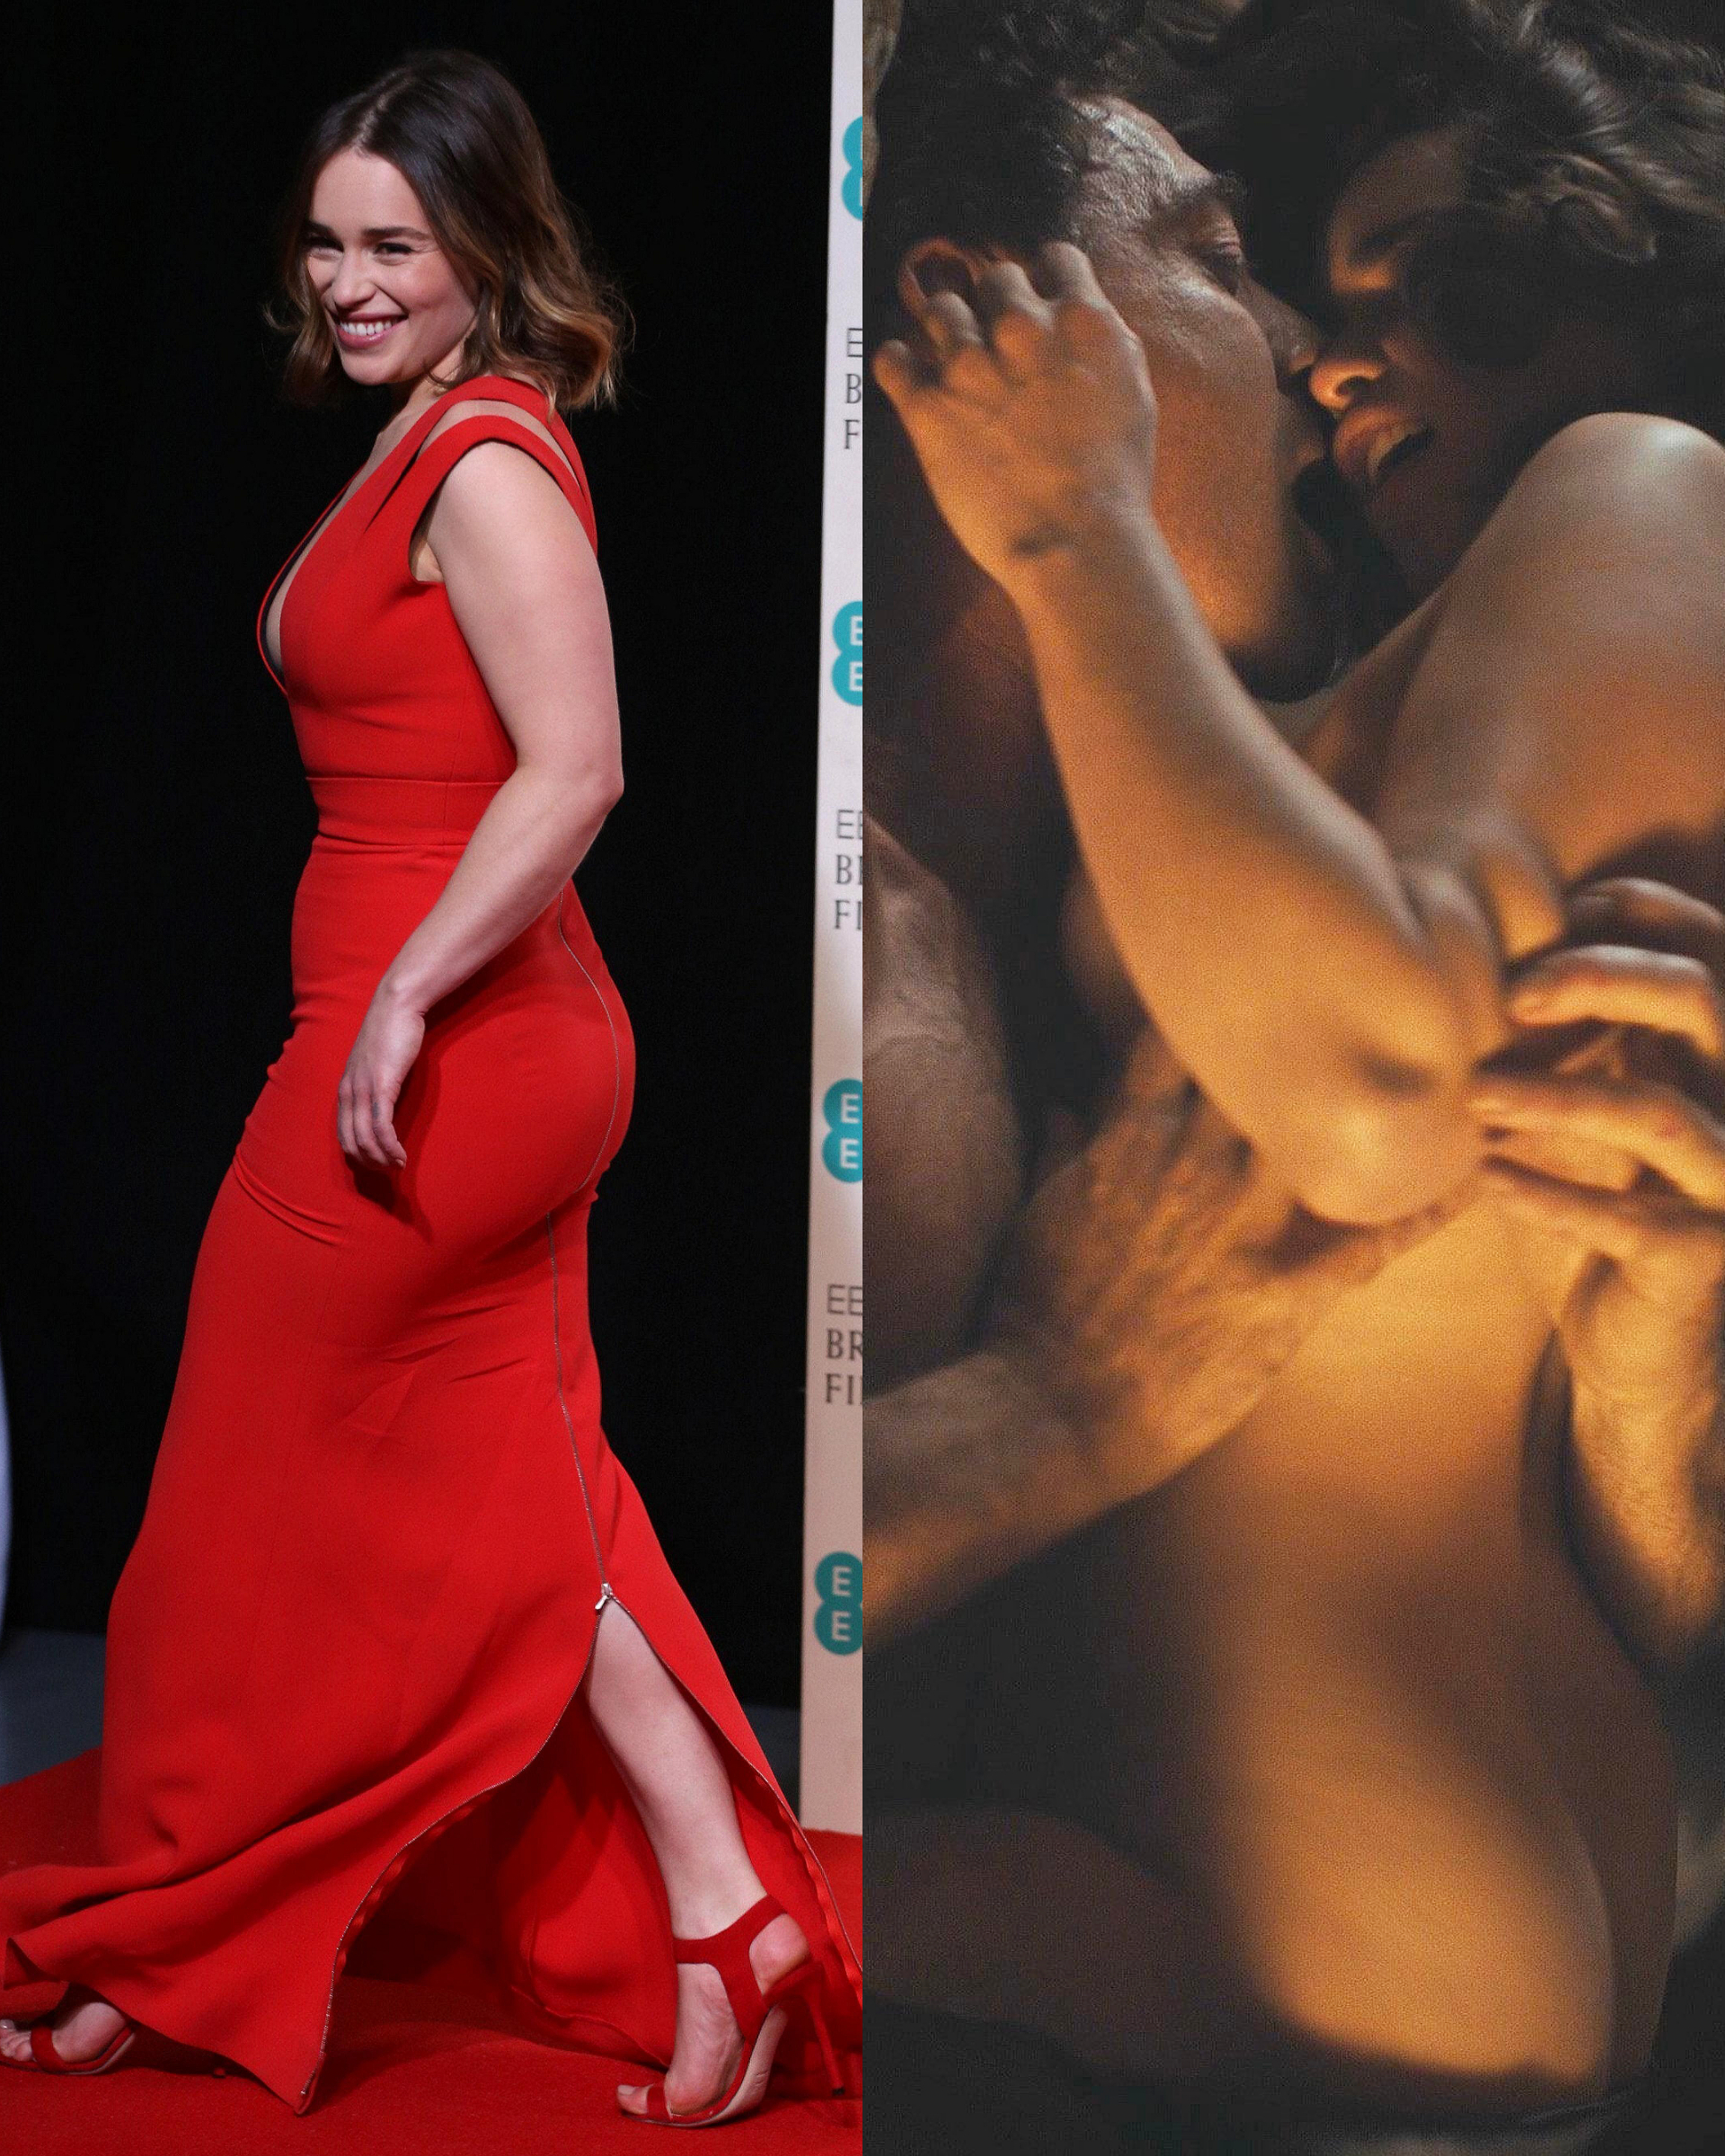 Emilia Clarke Wearing A Red Dress And Nude In Action NSF